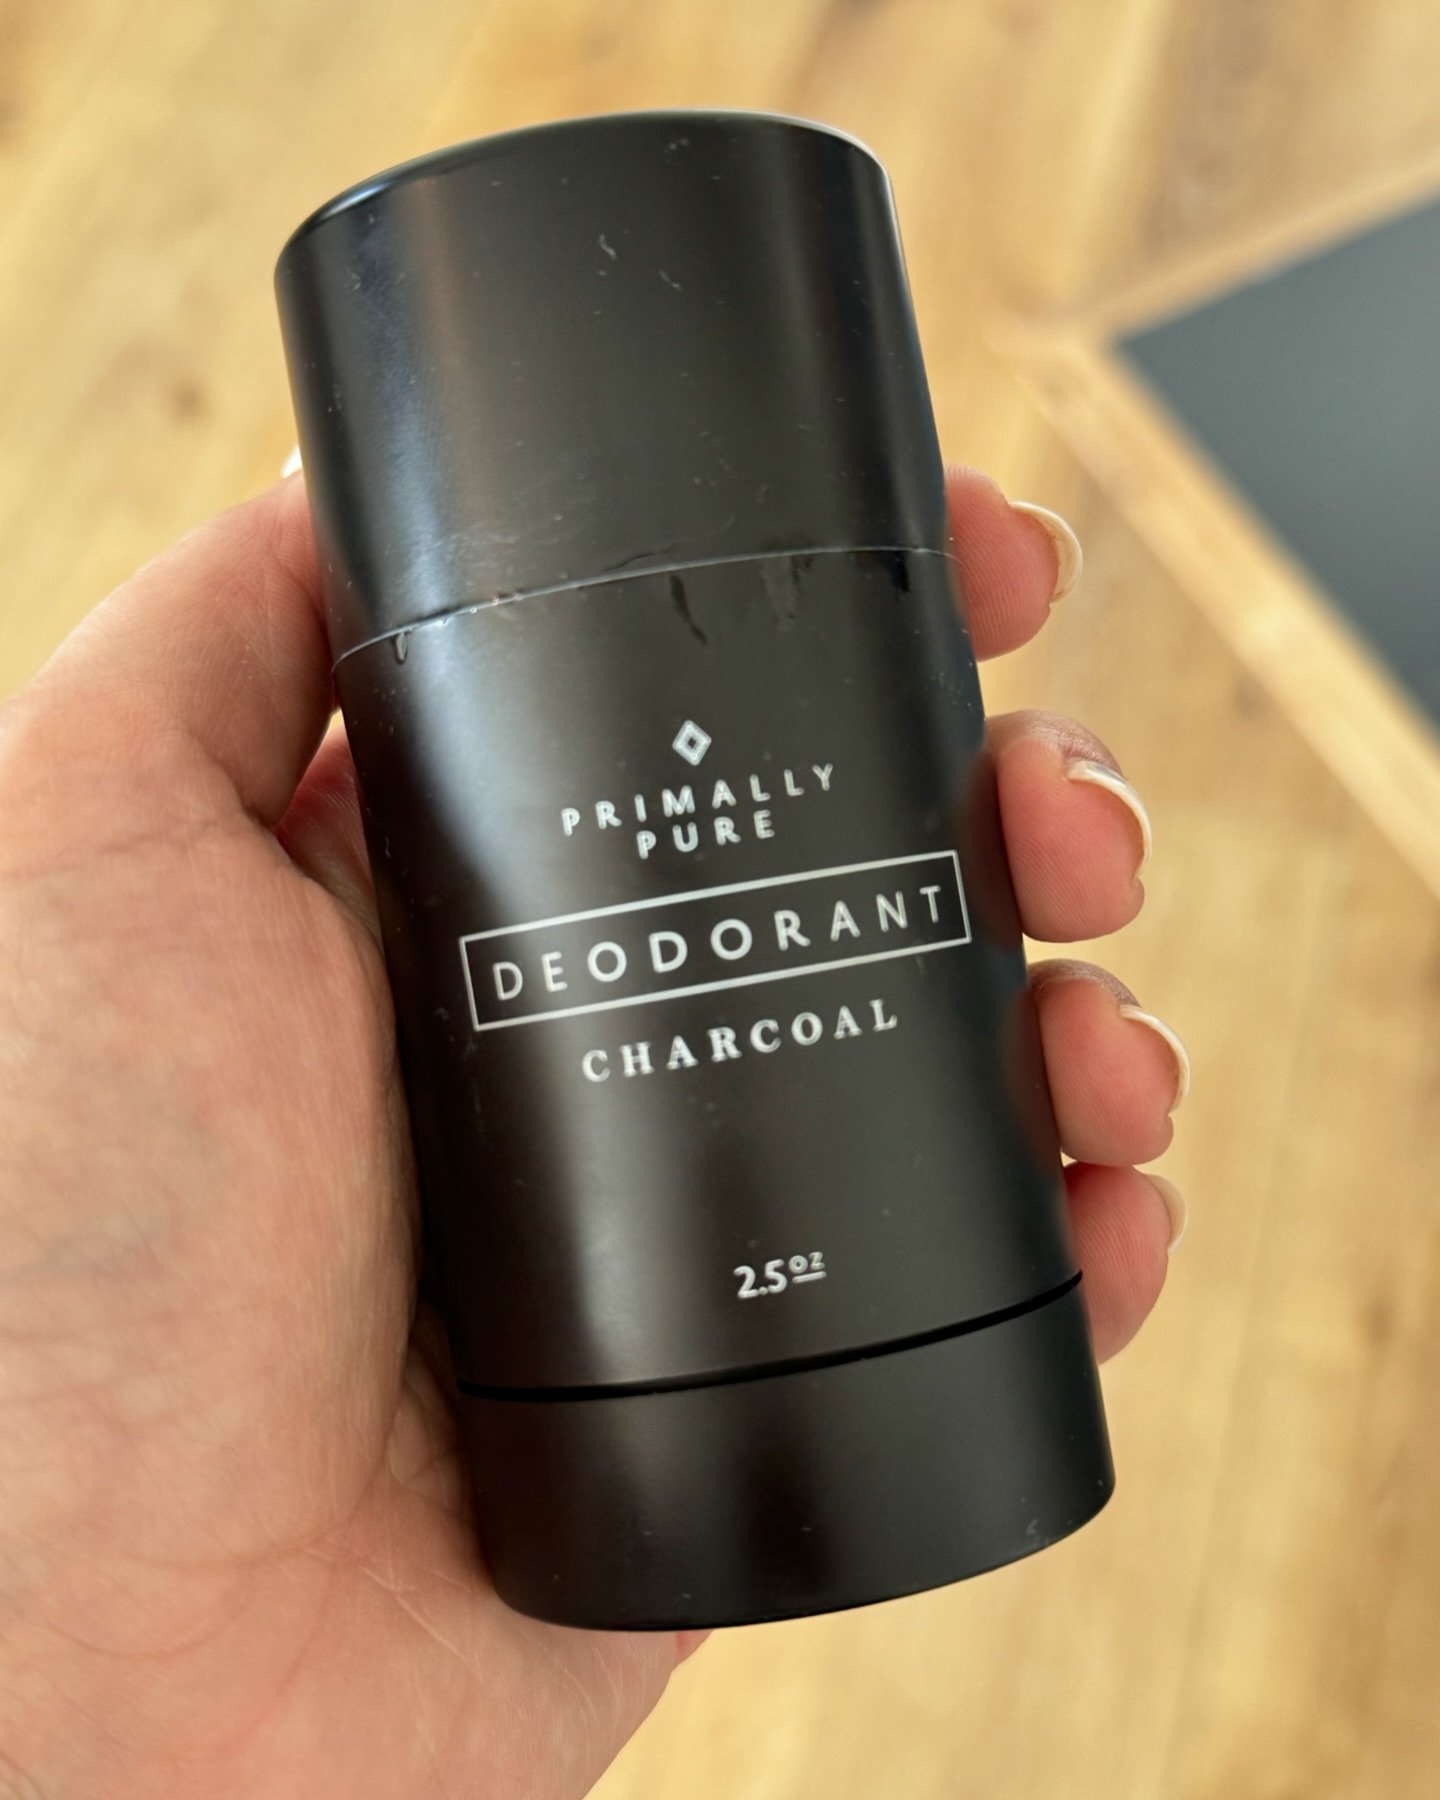 If you&rsquo;ve never found a natural deodorant that you love, then you must not have tried @primallypure deodorant.

Their charcoal deodorant has been my go-to for more than a decade. Be sure to share this with that friend you&rsquo;ve been chatting